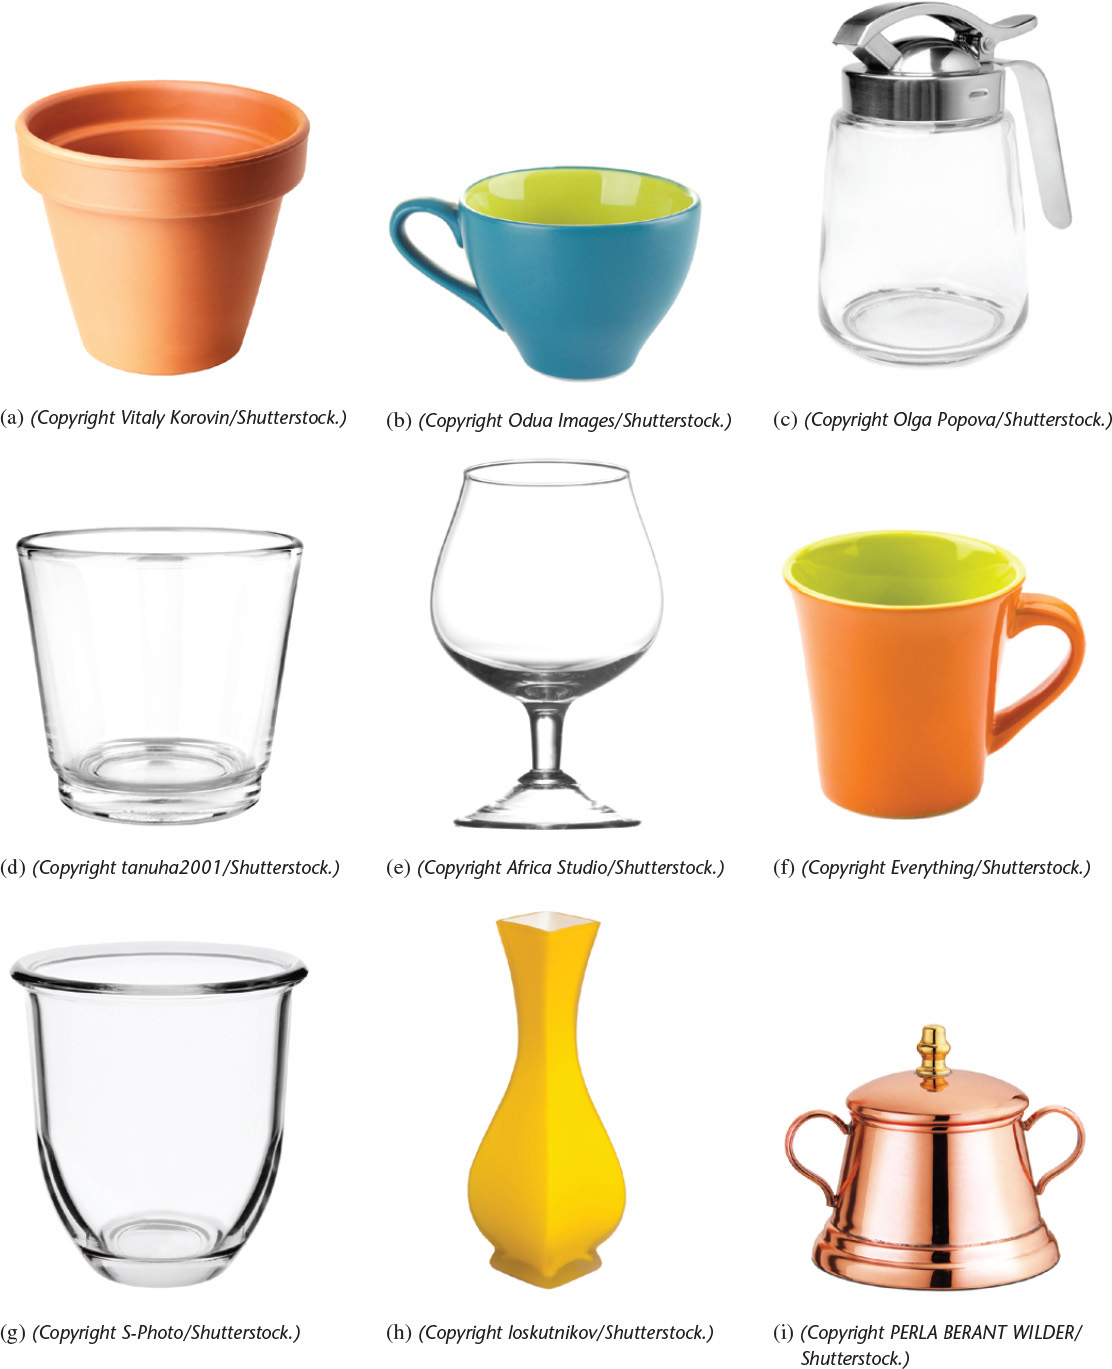 Photograph of a flower pot, teacup, jug, glass, whiskey glass, wine glass, coffee mug, cup, vase, and kettle.